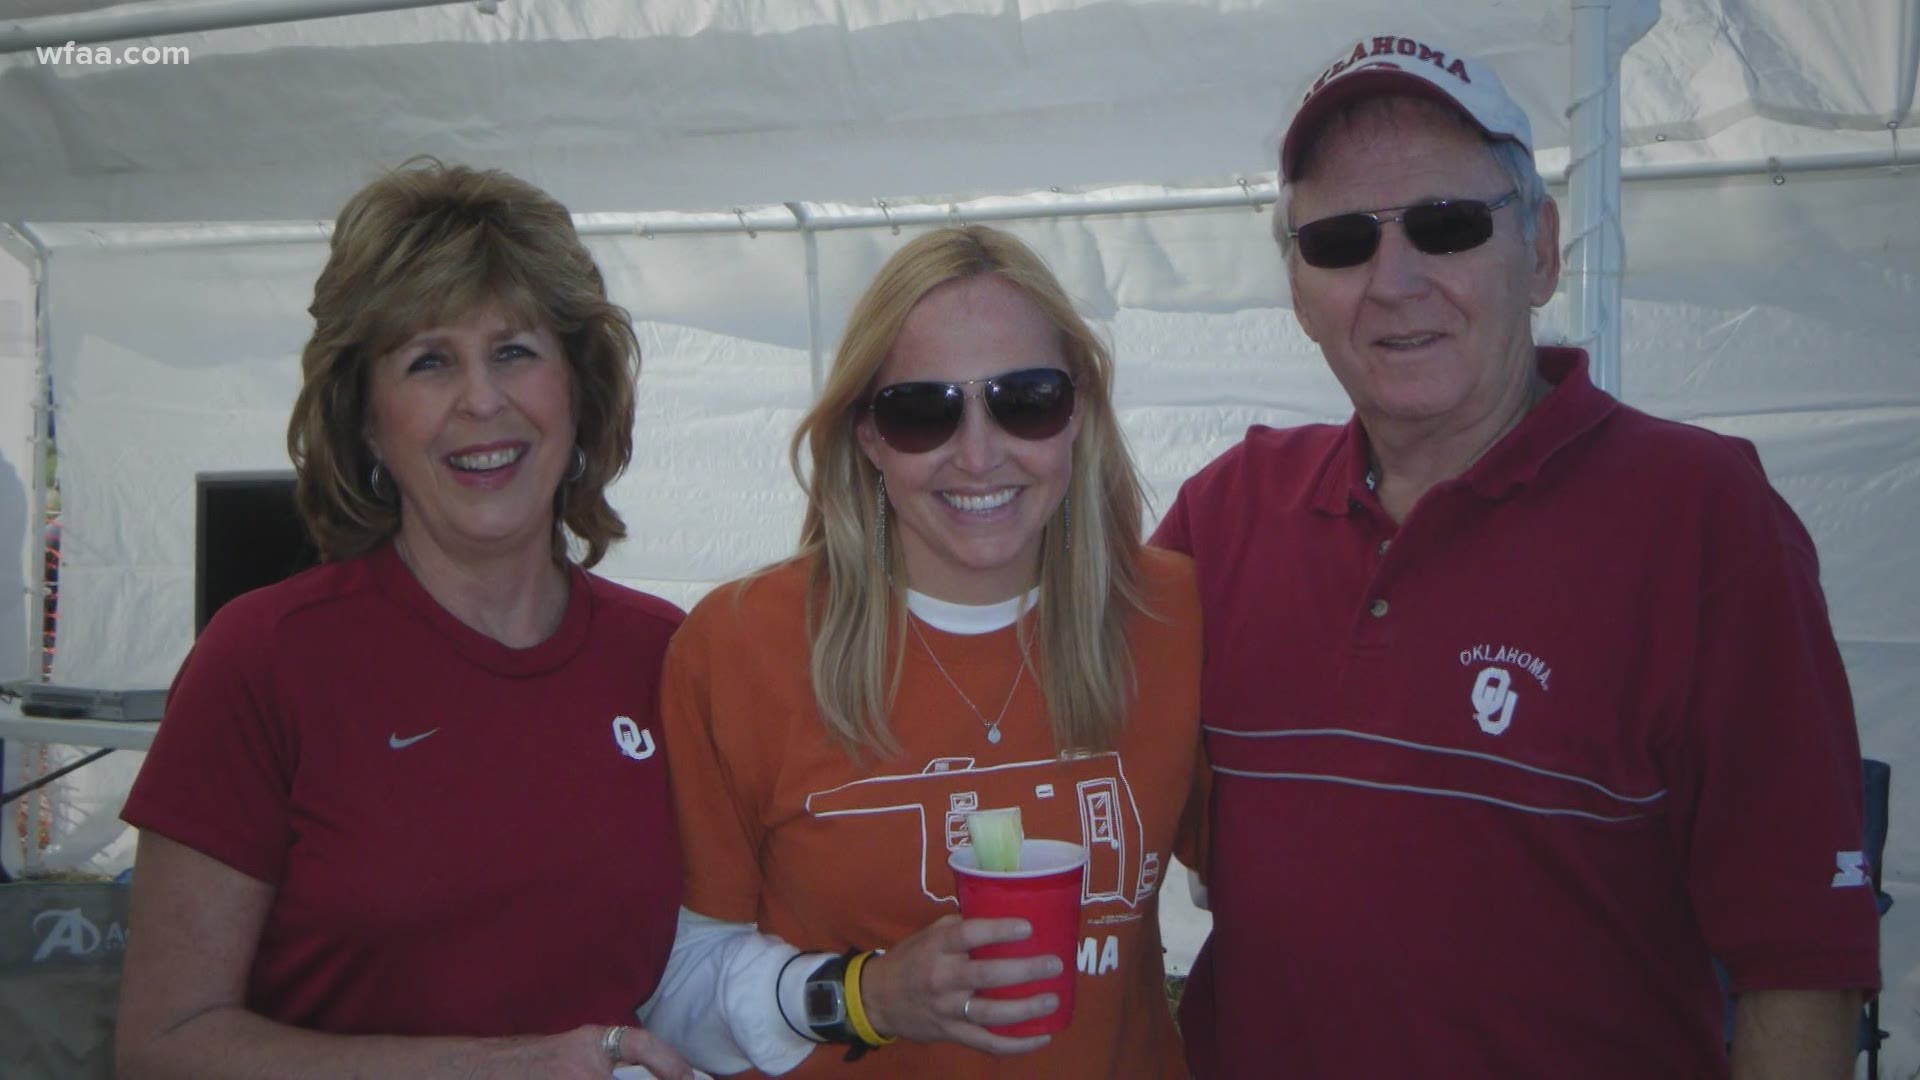 Dudley Patterson has been to 72 straight Red River rivalry games dating back to 1948. But COVID-19 and limited seating could have meant an end to the tradition.